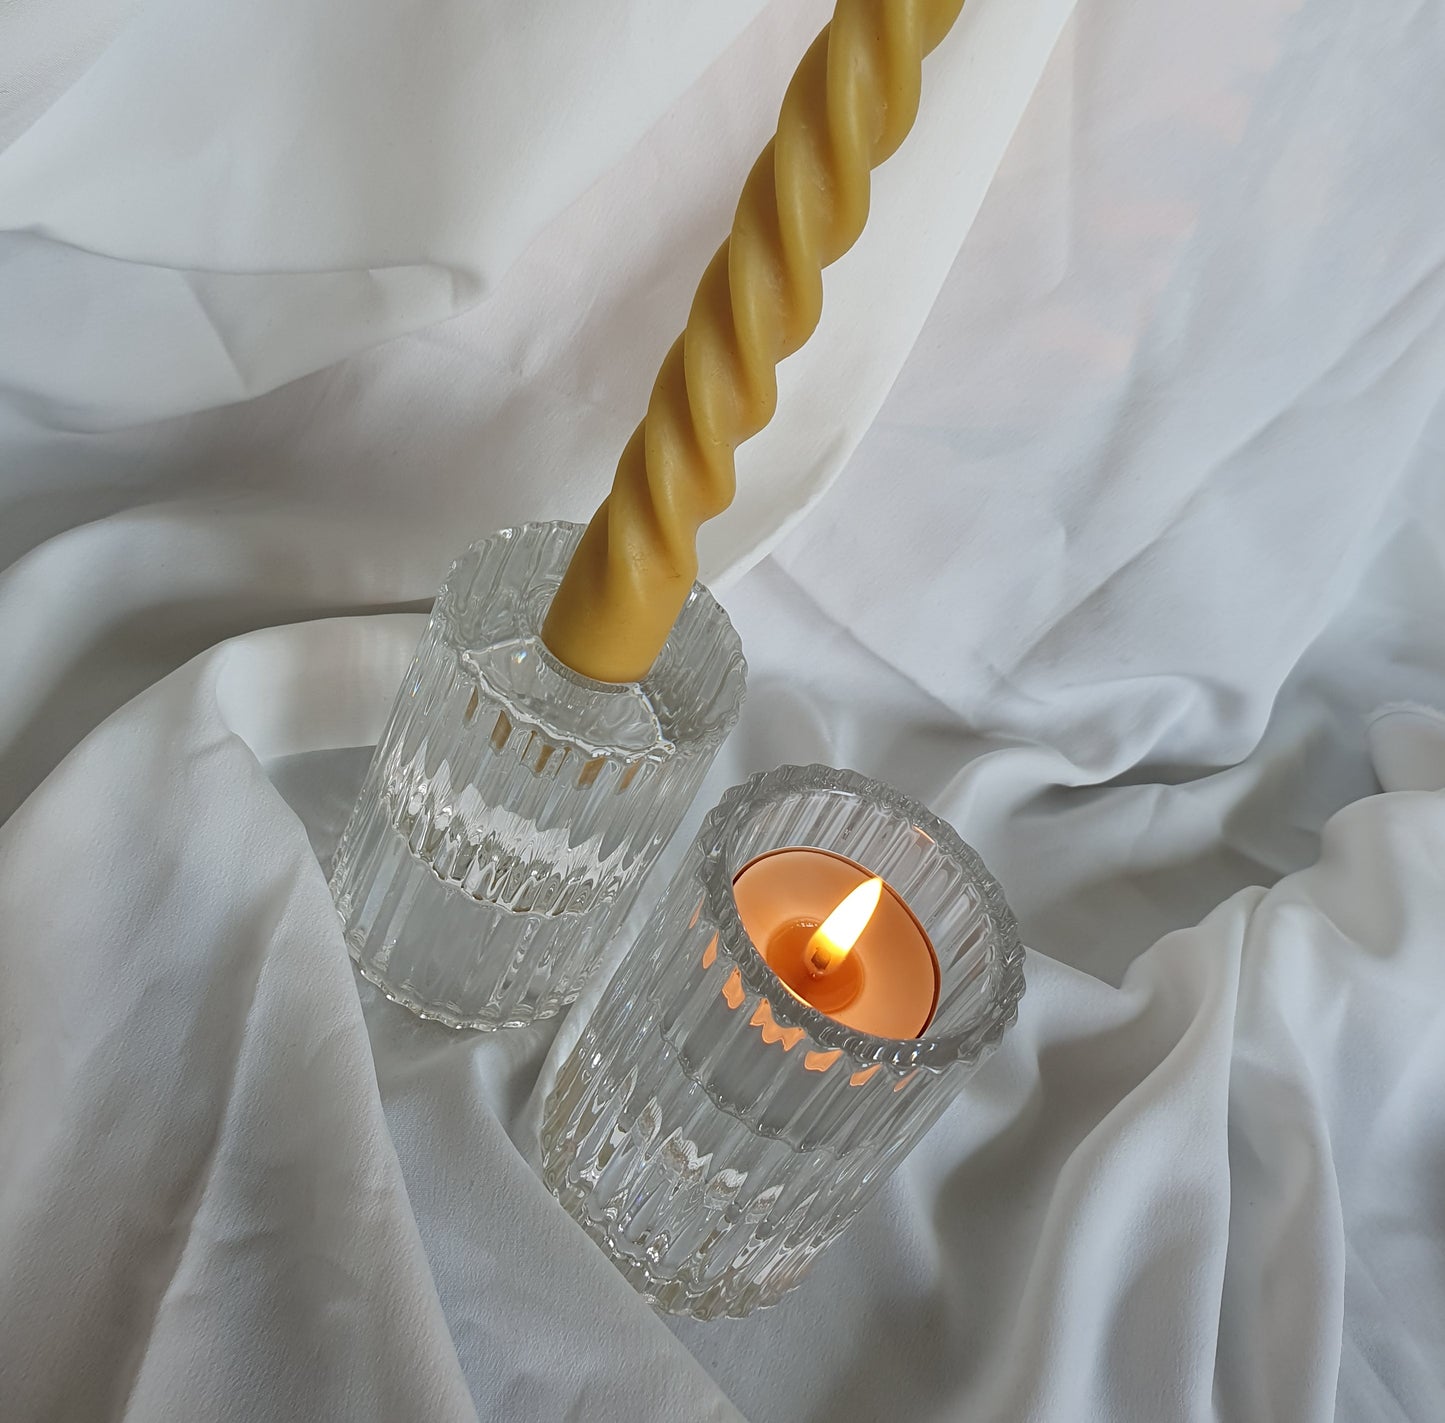 2 in 1 glass candle holder